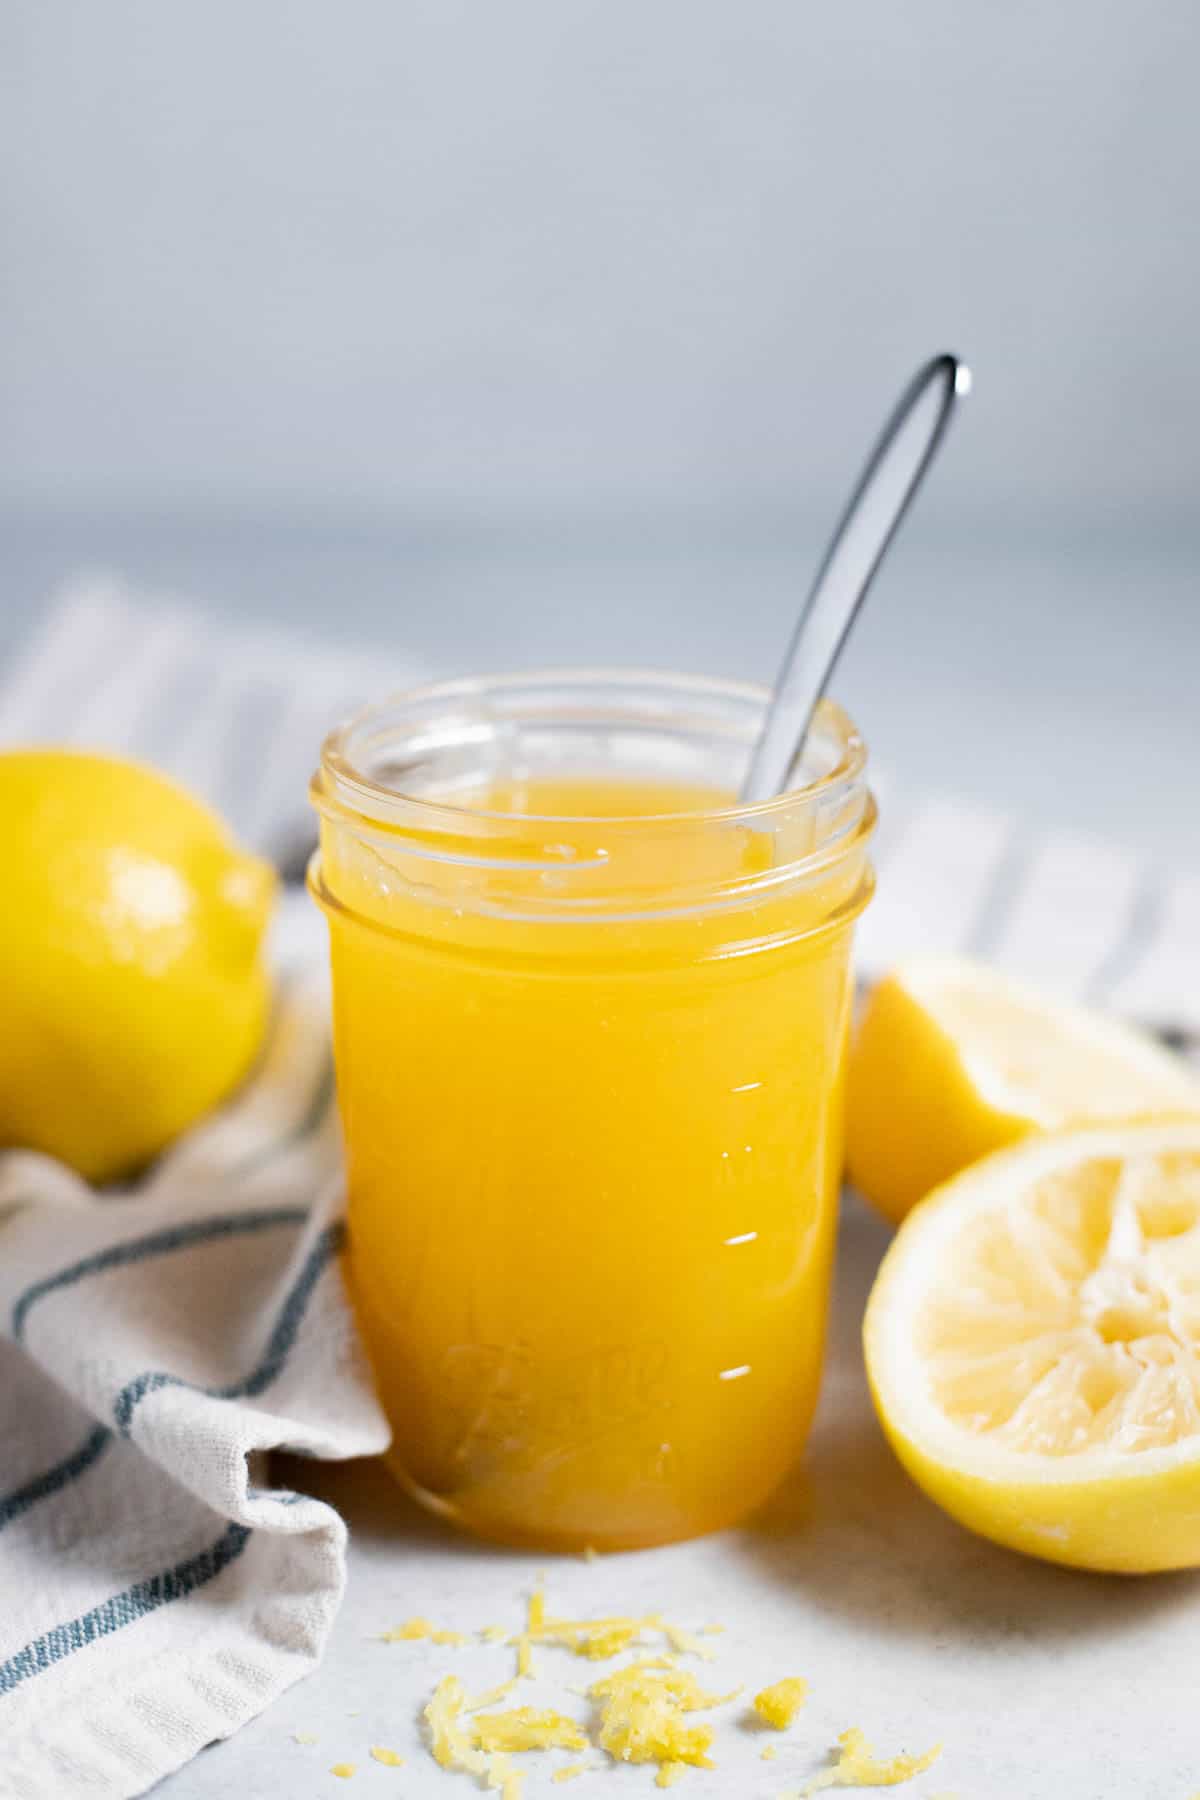 Lemon curd in a glass jar on a gray surface.